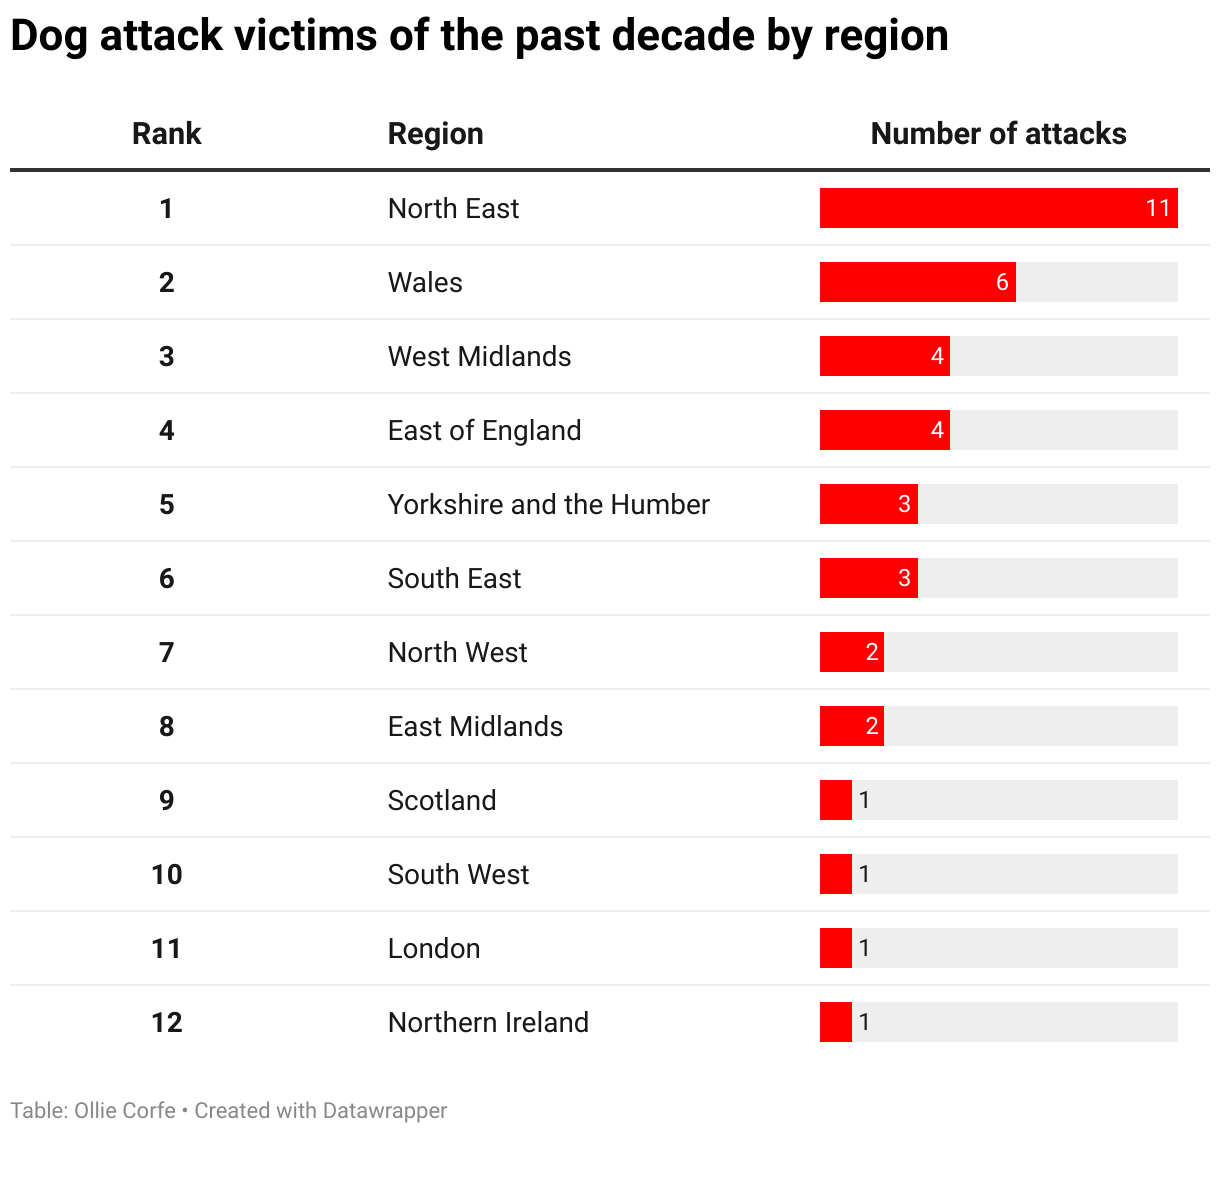 Table of dog attack victim stats.